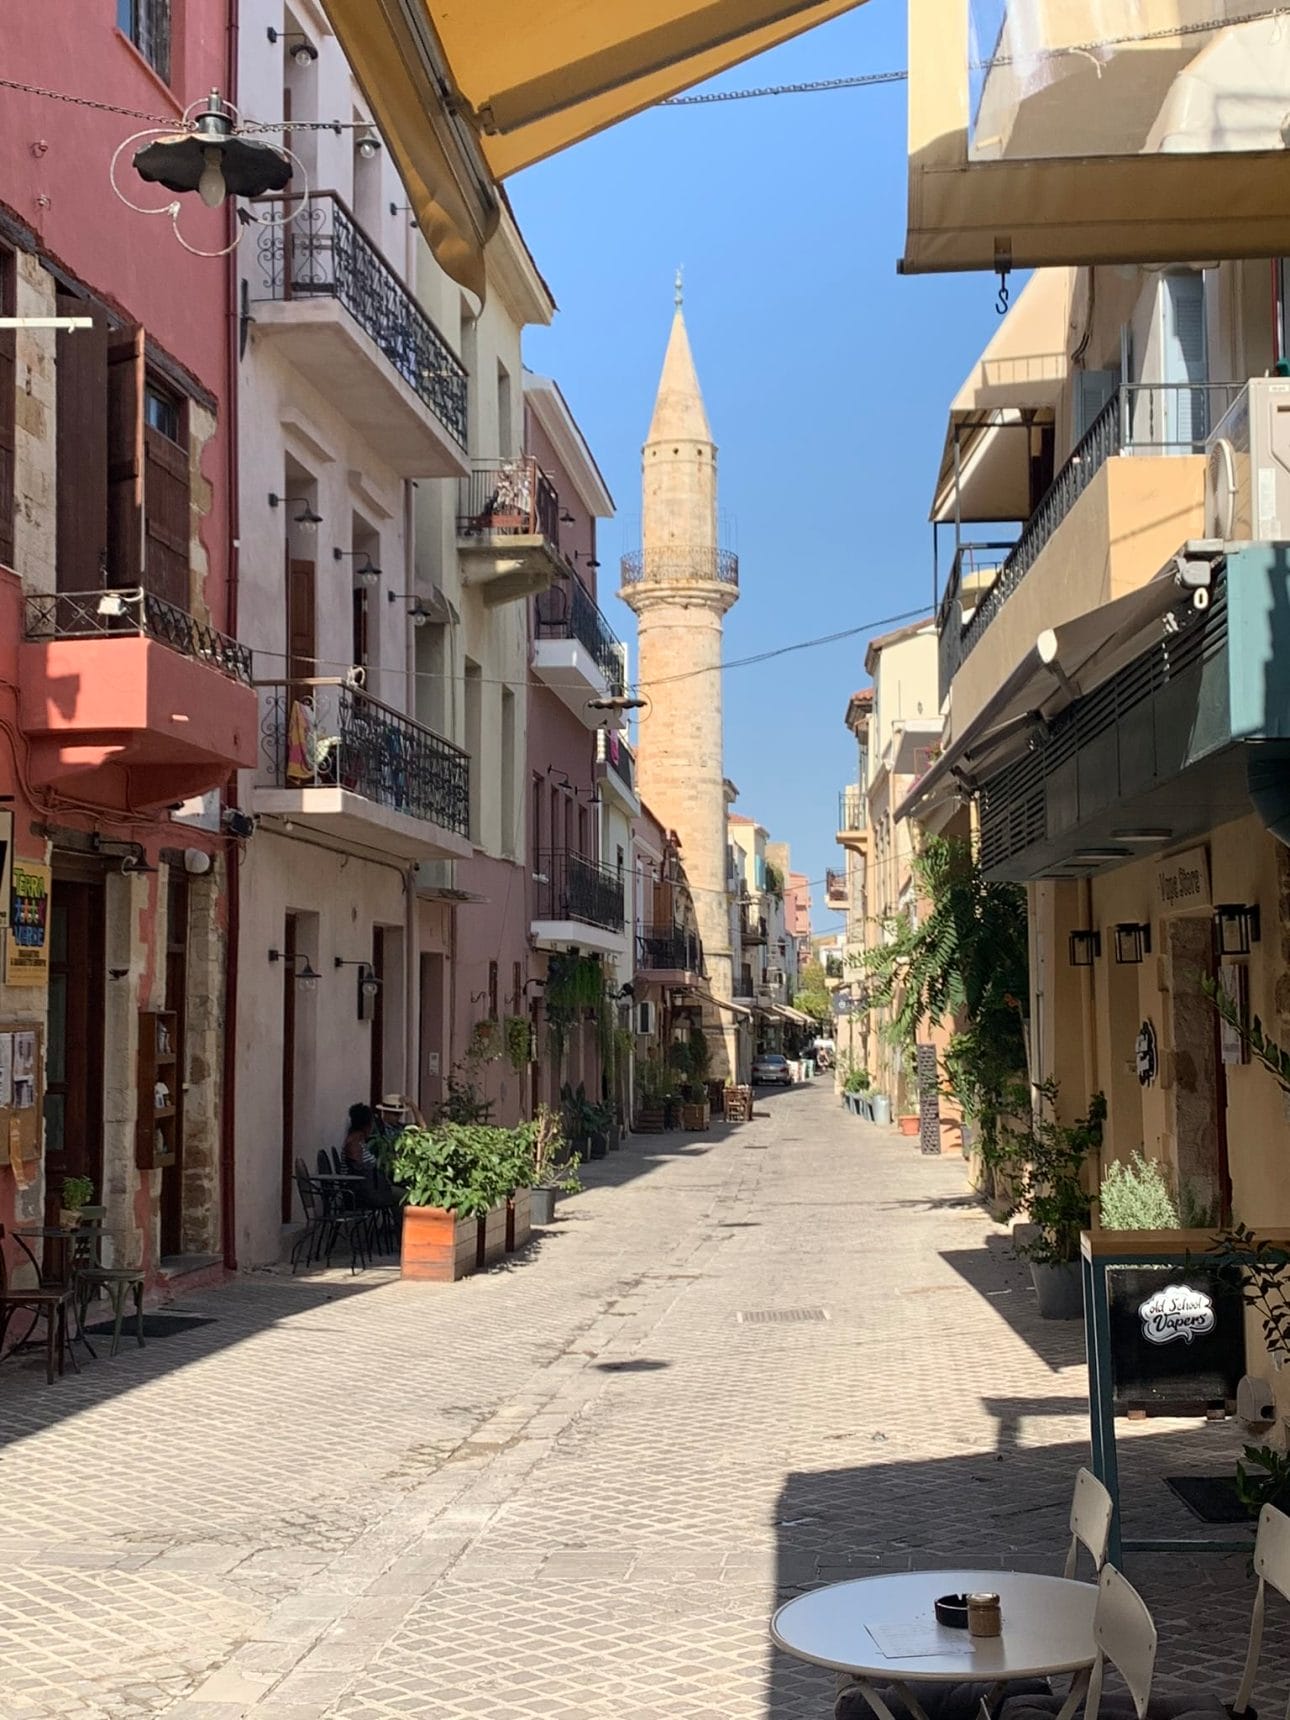 narrow street in the city of chania in crete greece